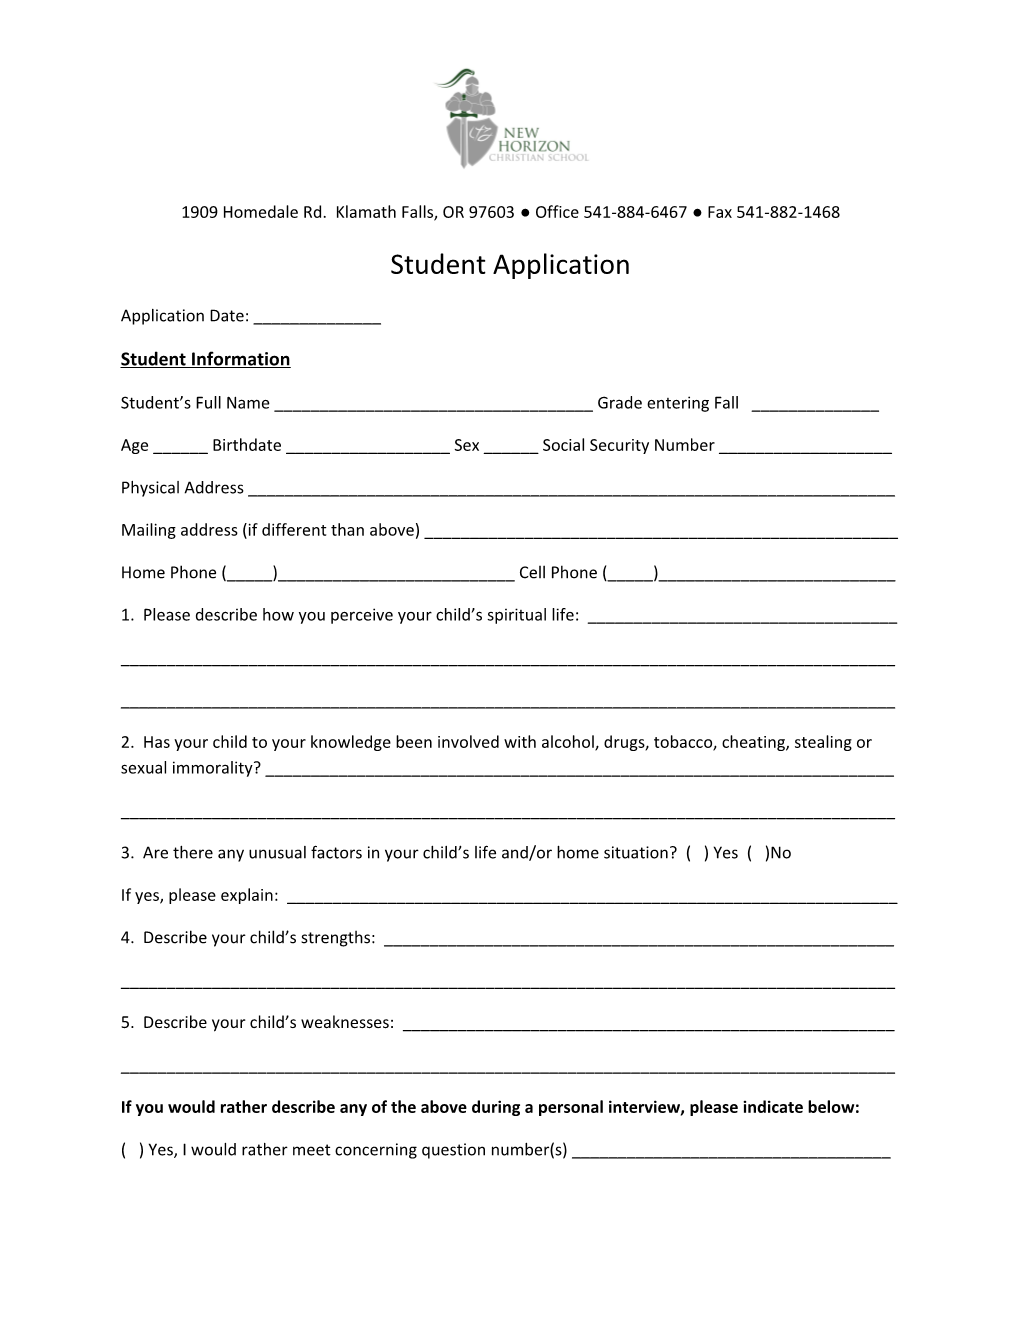 Student Application s1